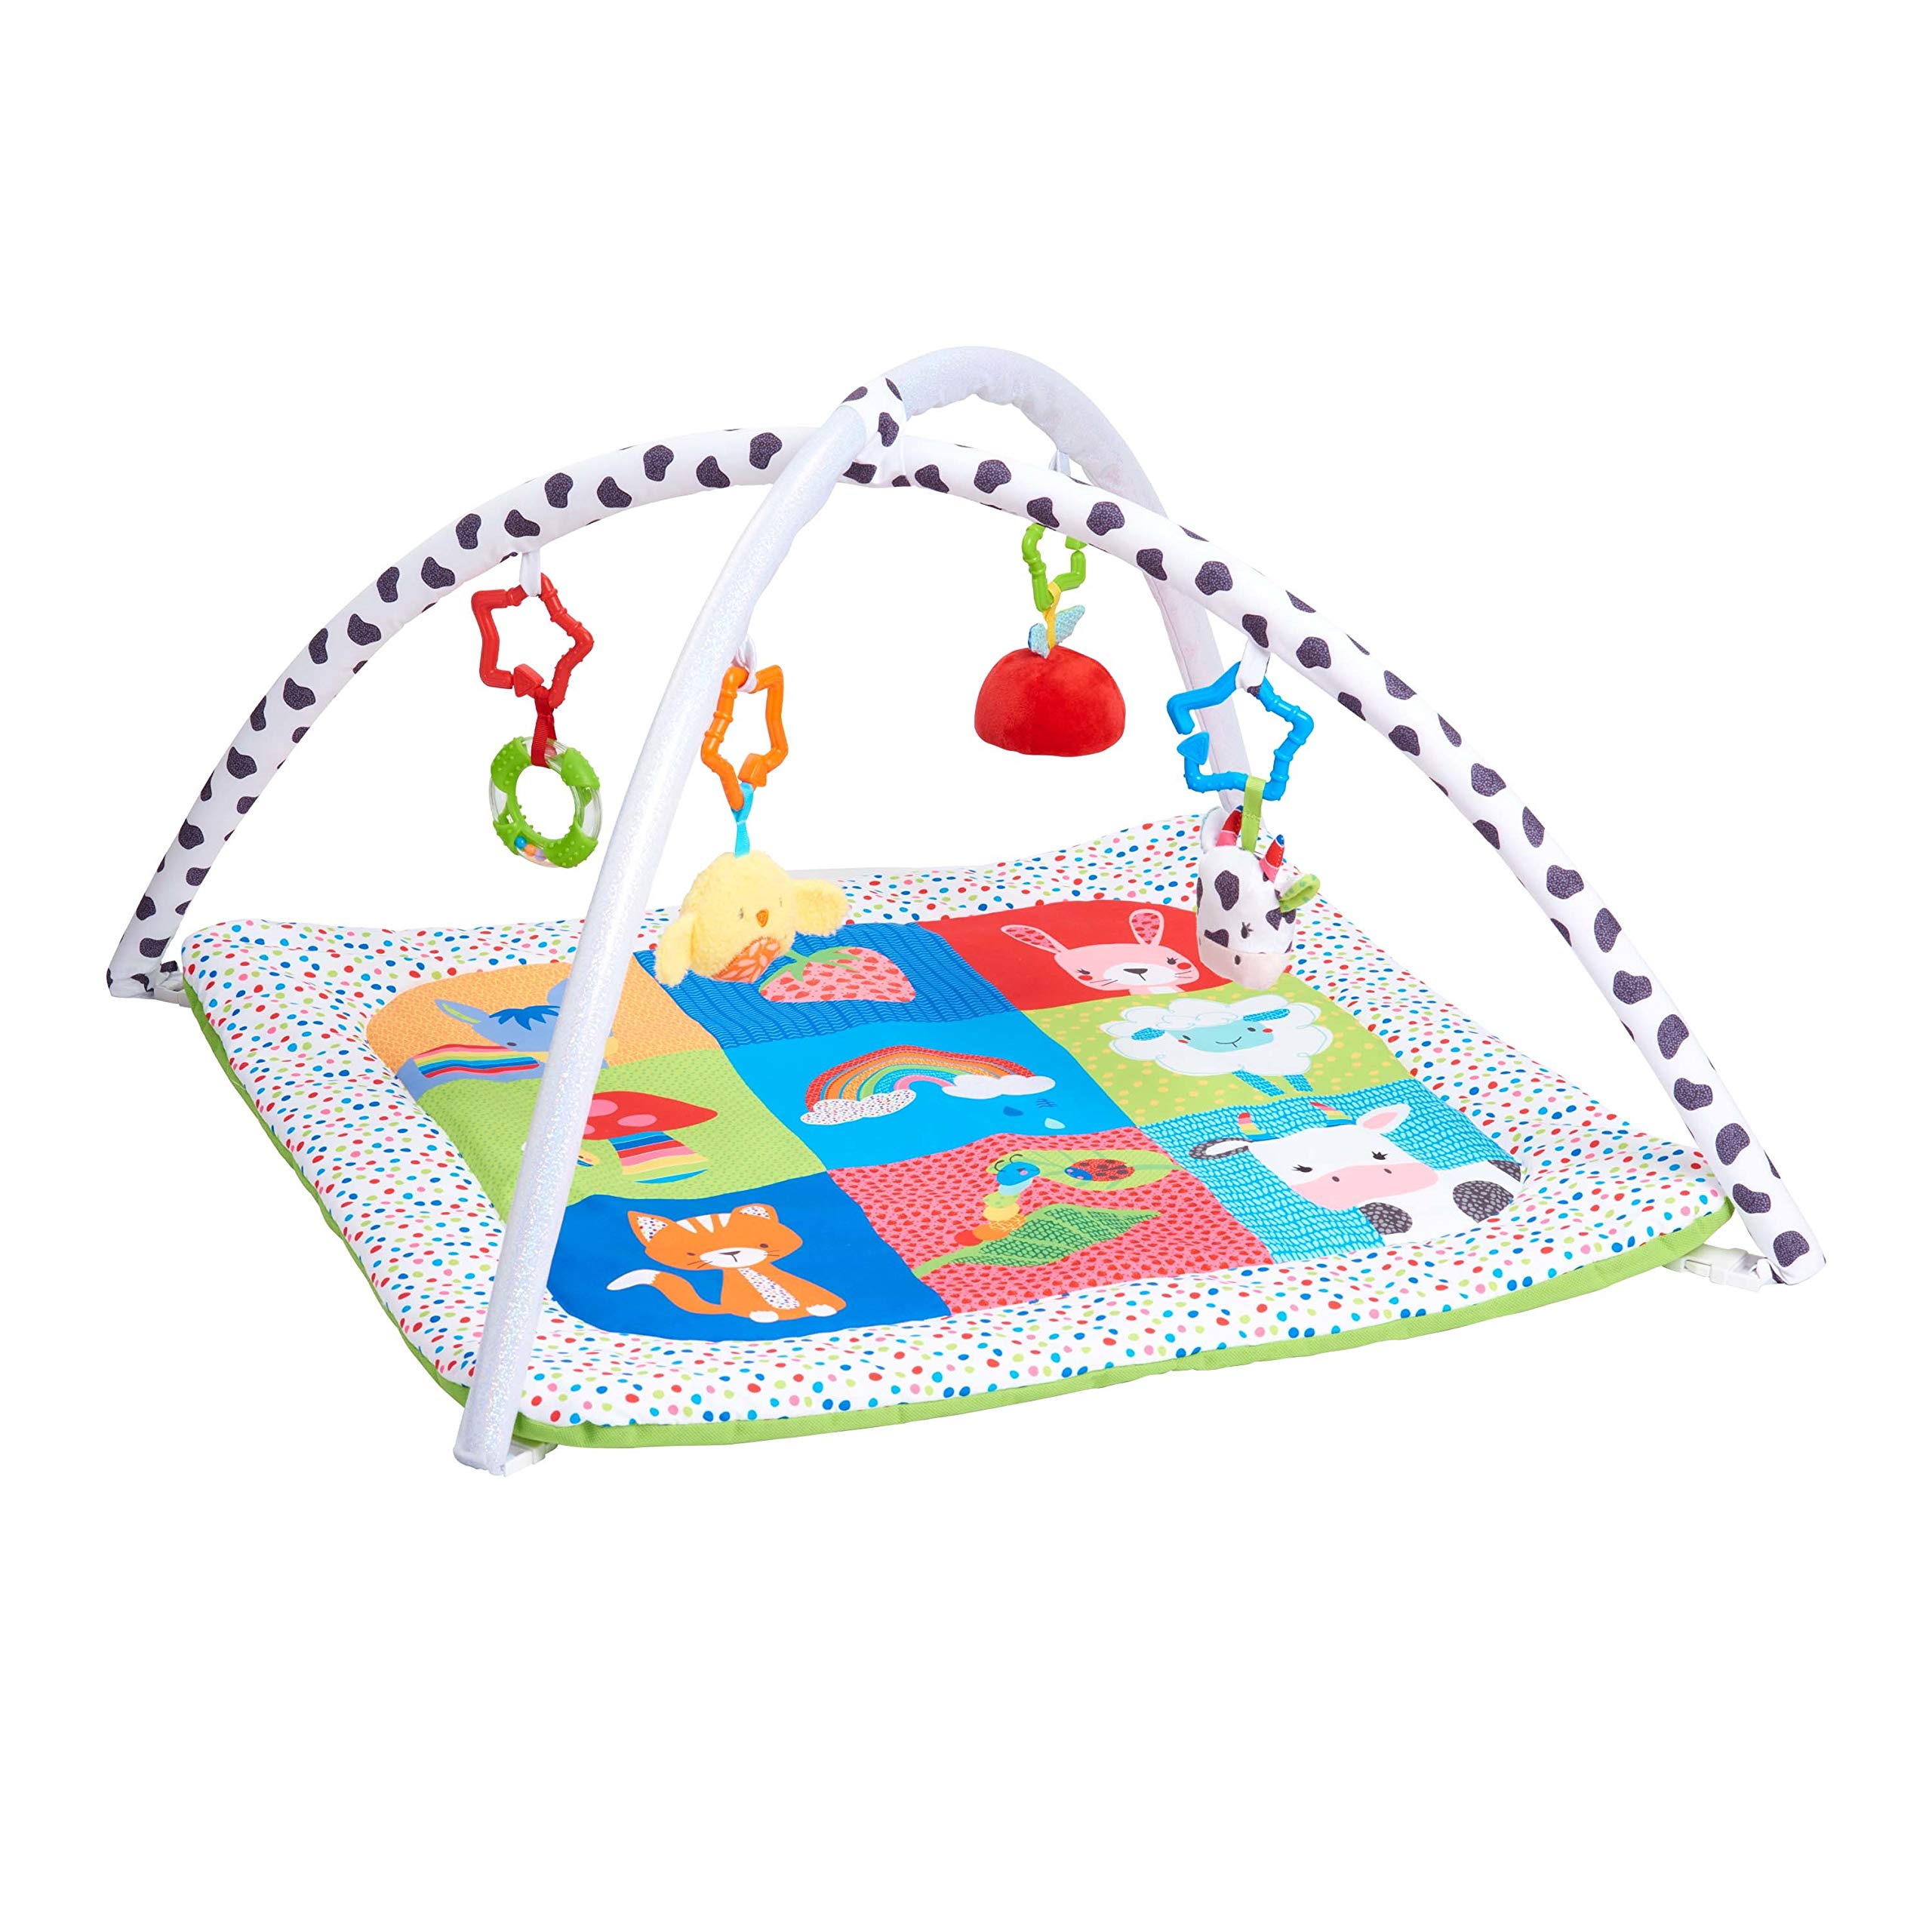 Early Learning Centre Blossom Farm Playmat & Arch, Physical Development, Hand Eye Coordination, Stimulates Senses, Baby Toys 0+ Months, Amazon Exclusive, by Just Play